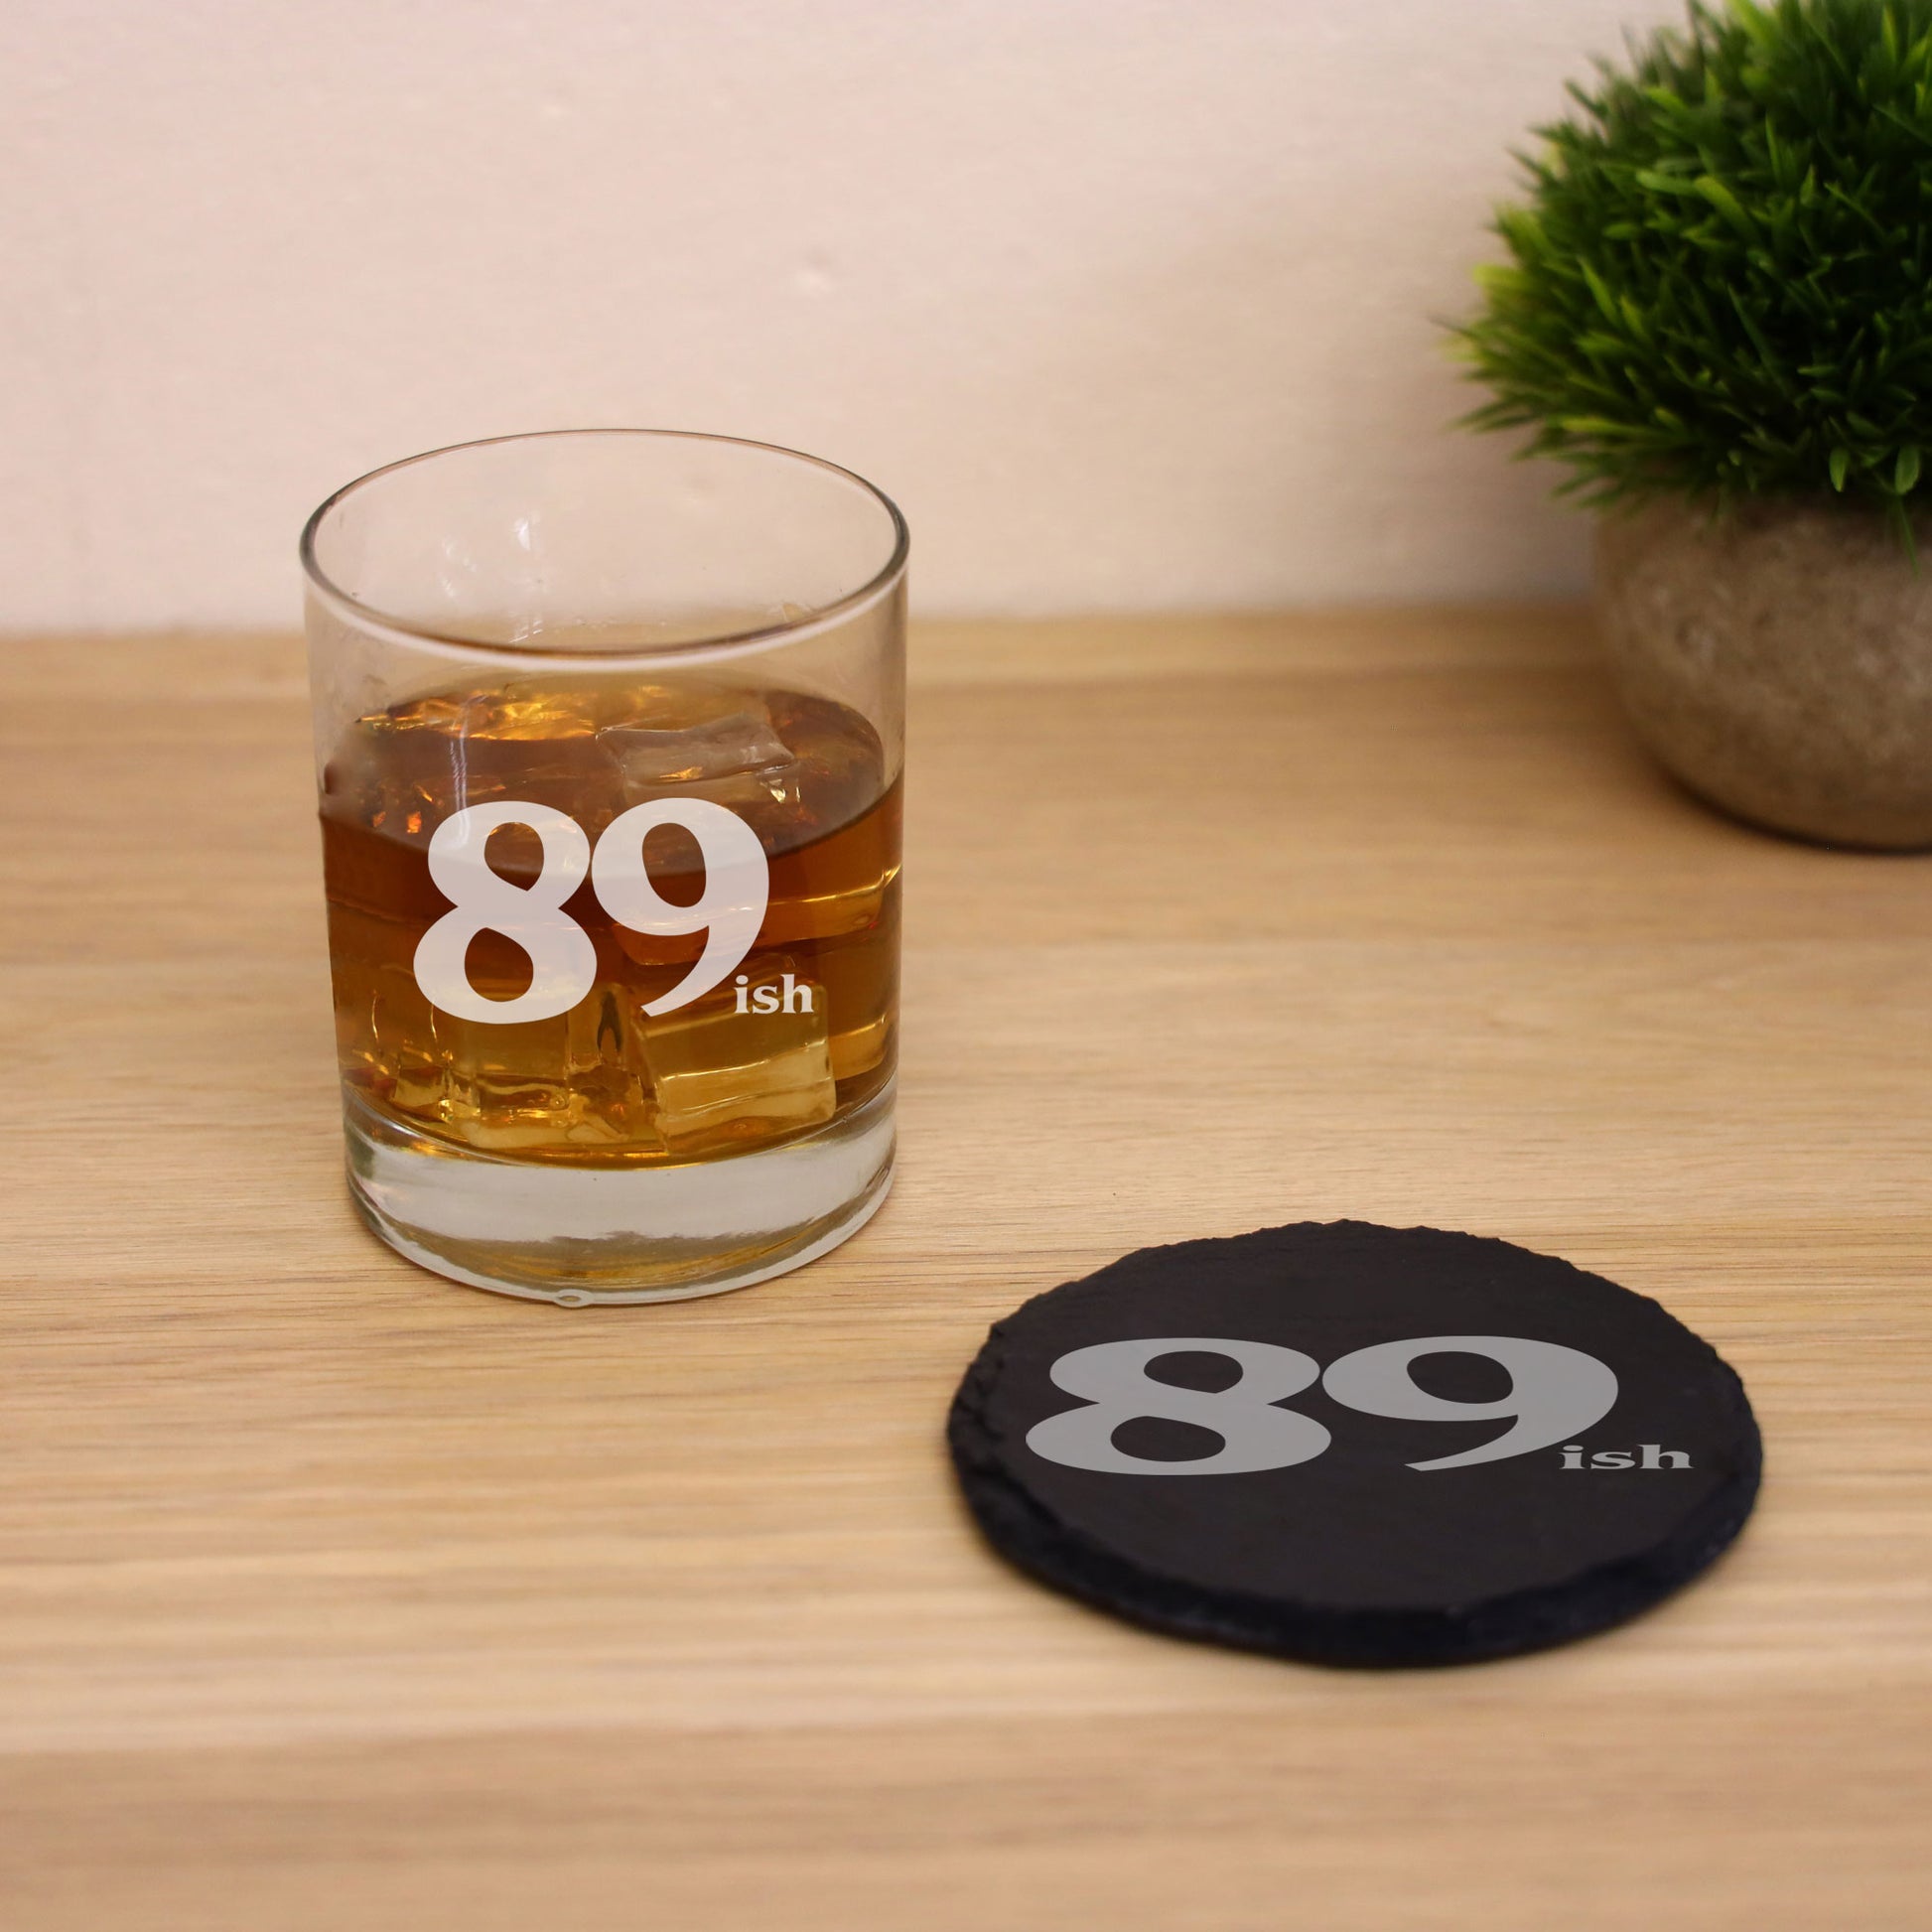 89ish Whisky Glass and/or Coaster Set  - Always Looking Good - Glass & Round Coaster Set  